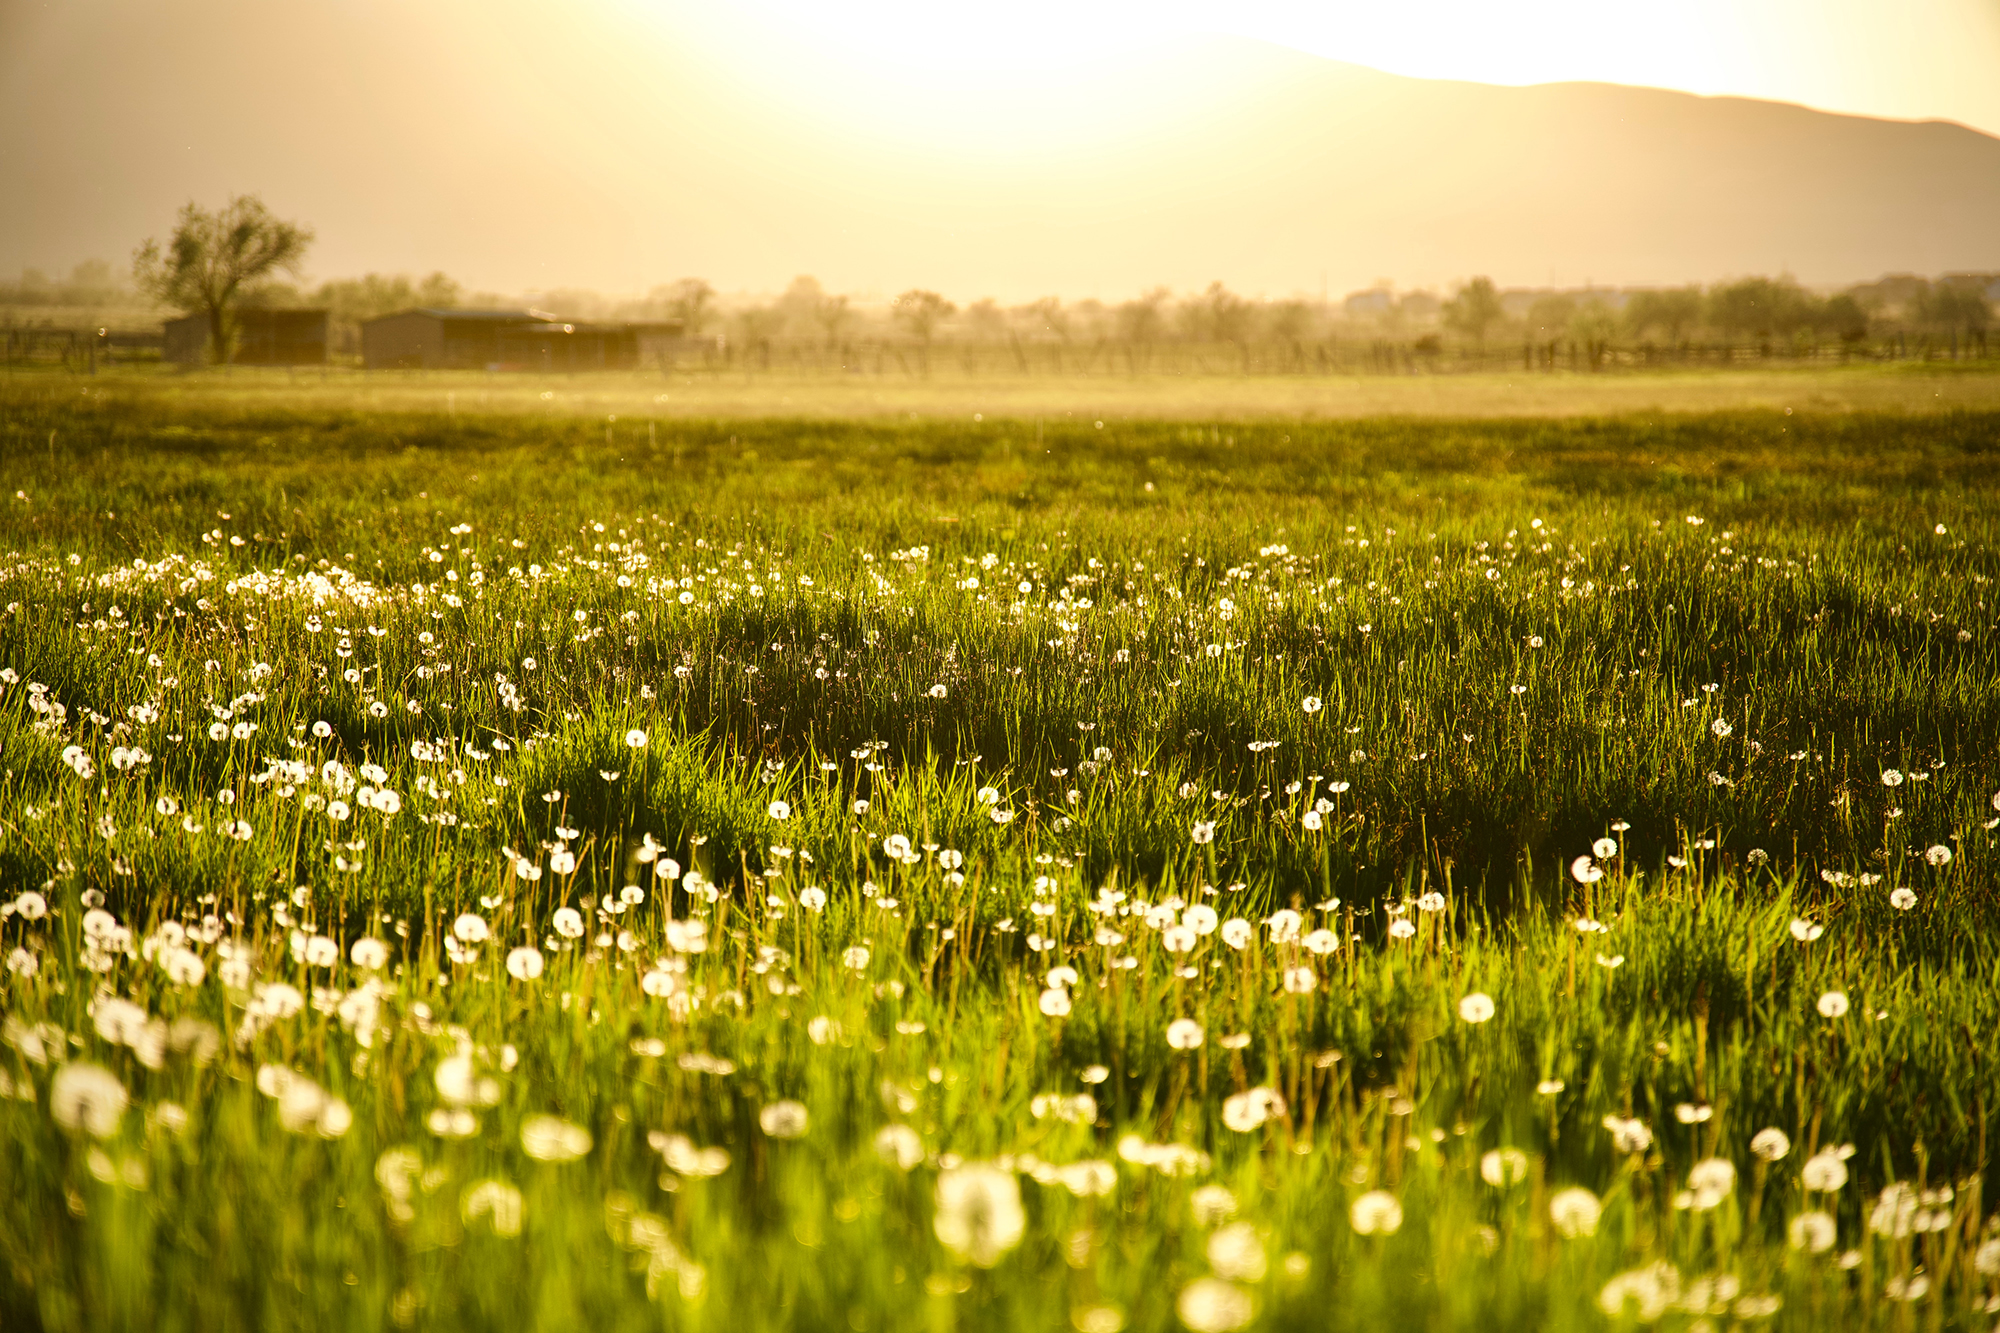 Field of little white flowers as sun rises over mountain